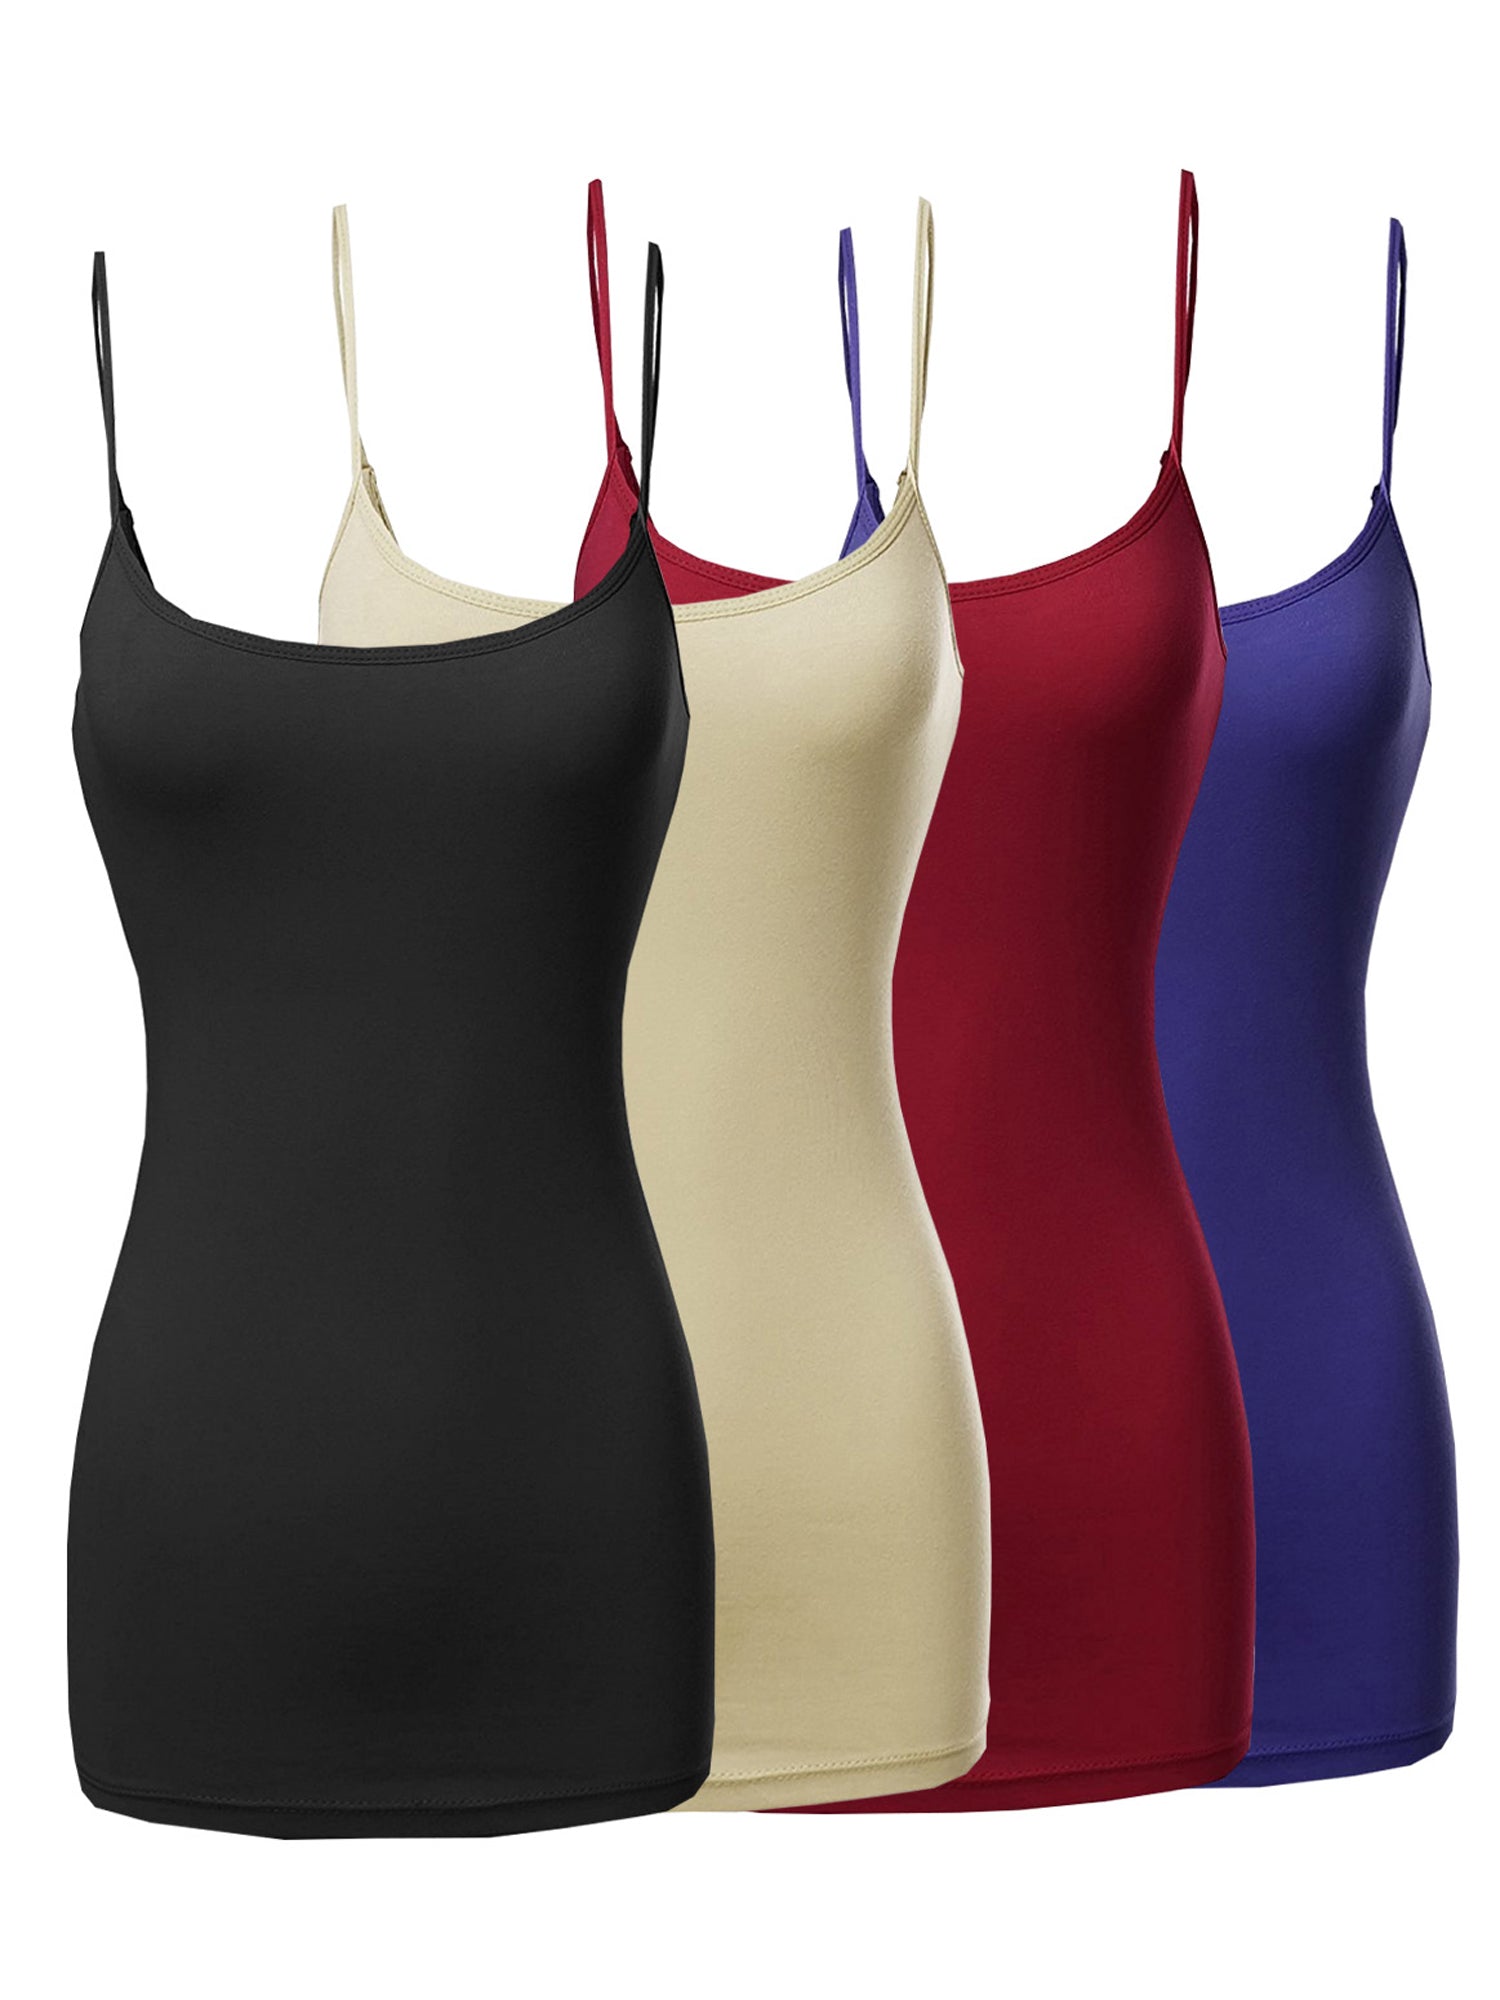 Long Camisole Tank Tops for Women Scoop Neck Sleeveless Camisole